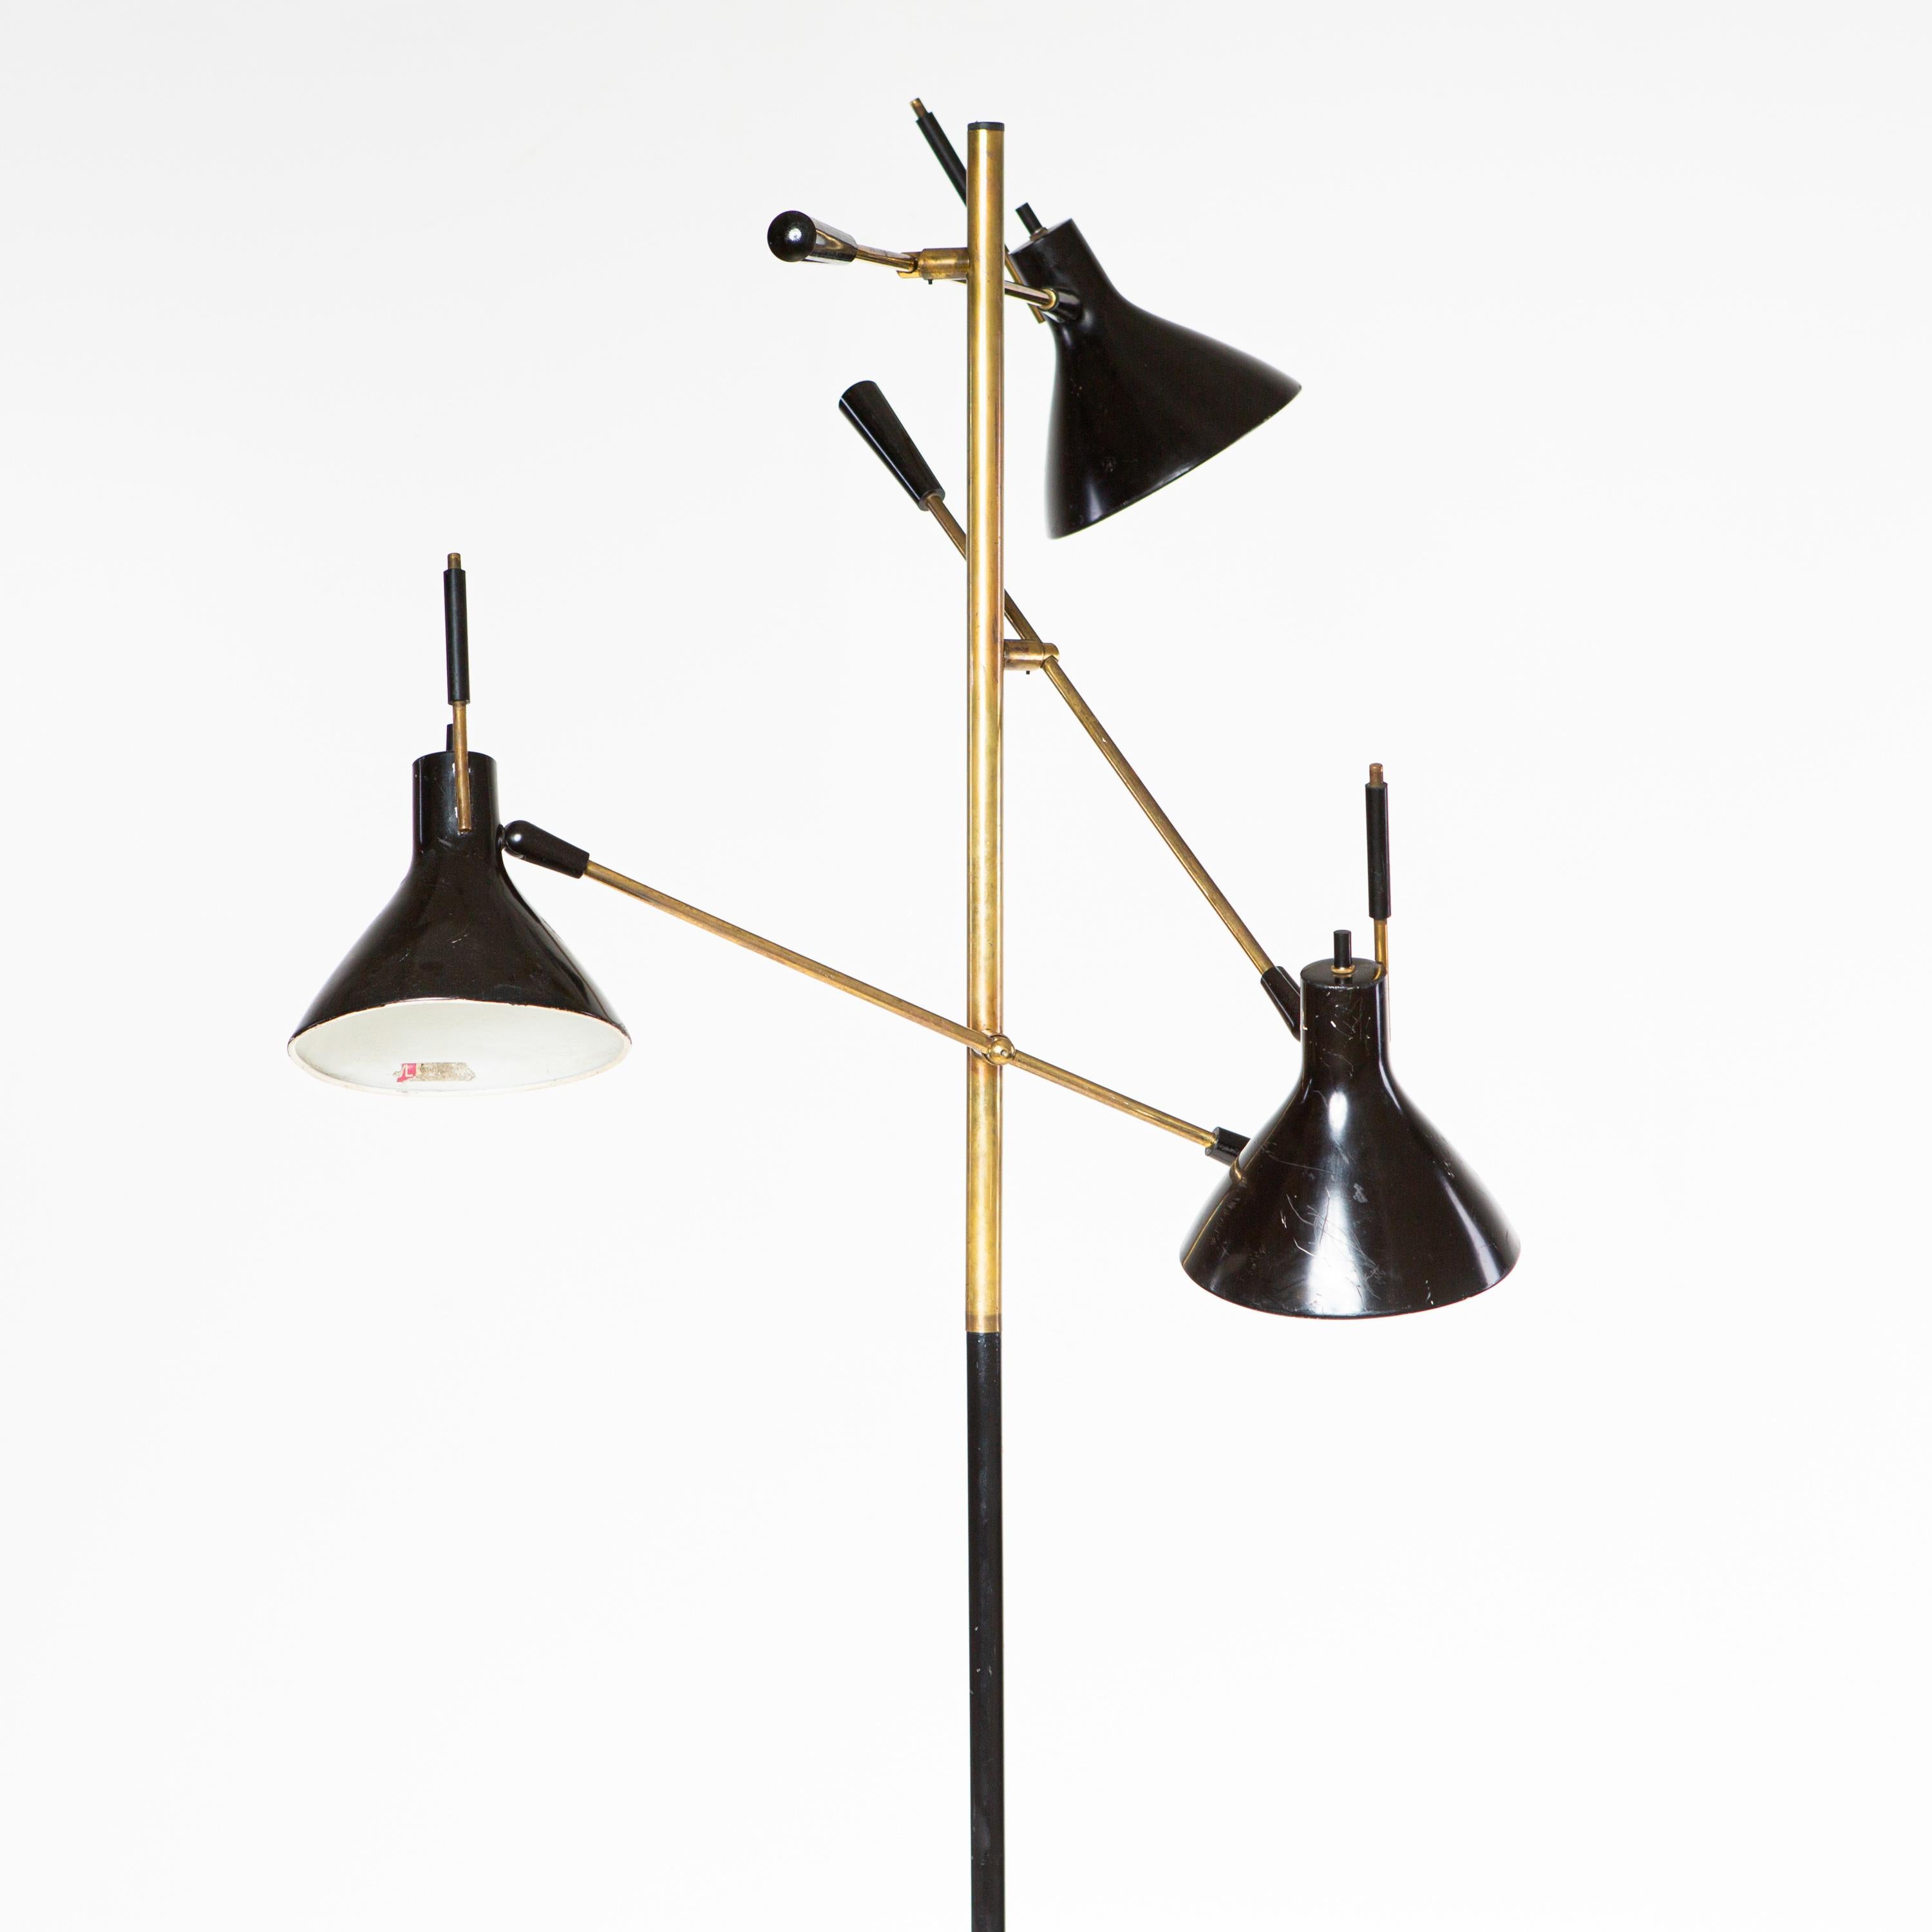 Large floor lamp standing on a round marble base with black shaft and three brass arms. These are adjustable in inclination and end in conical black lampshades. Labeled 